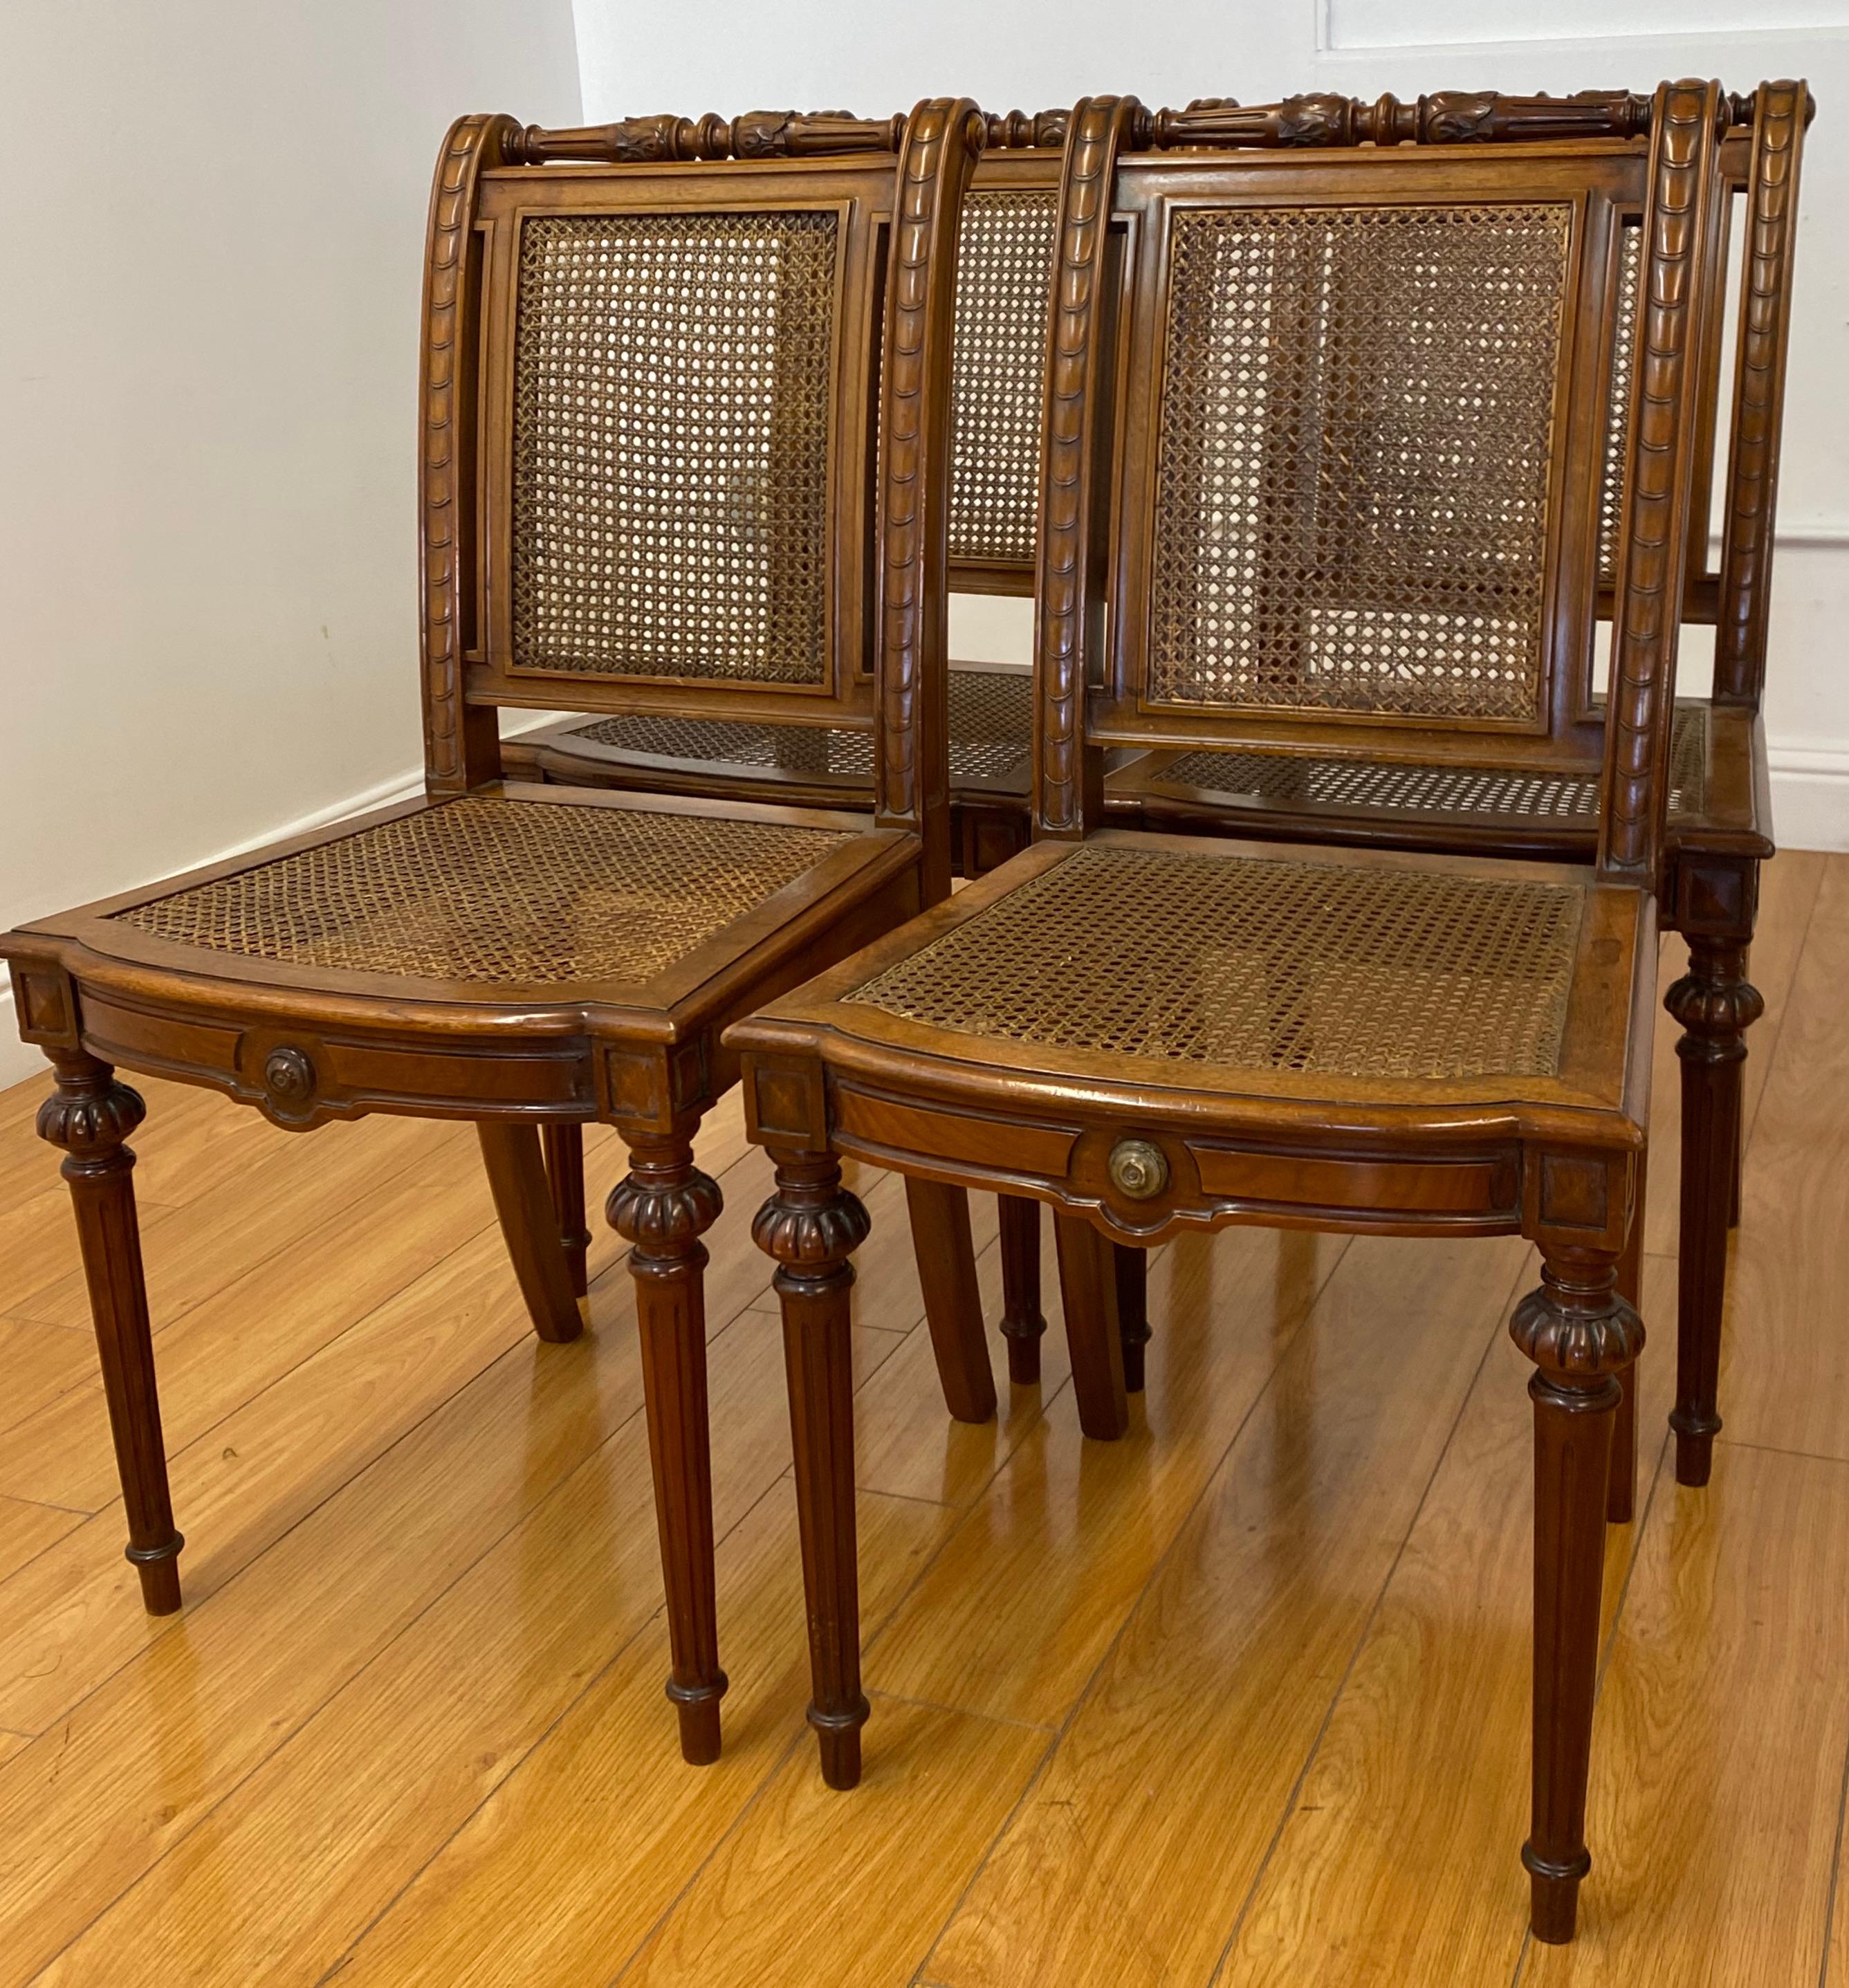 Carved walnut & cane side chairs, C.1940

Gorgeous set of four dining chairs

One of the chairs shows a past professional repair (see pics), the chairs are solid and sturdy

Offered as a matching set of four only

Measures: 18.5